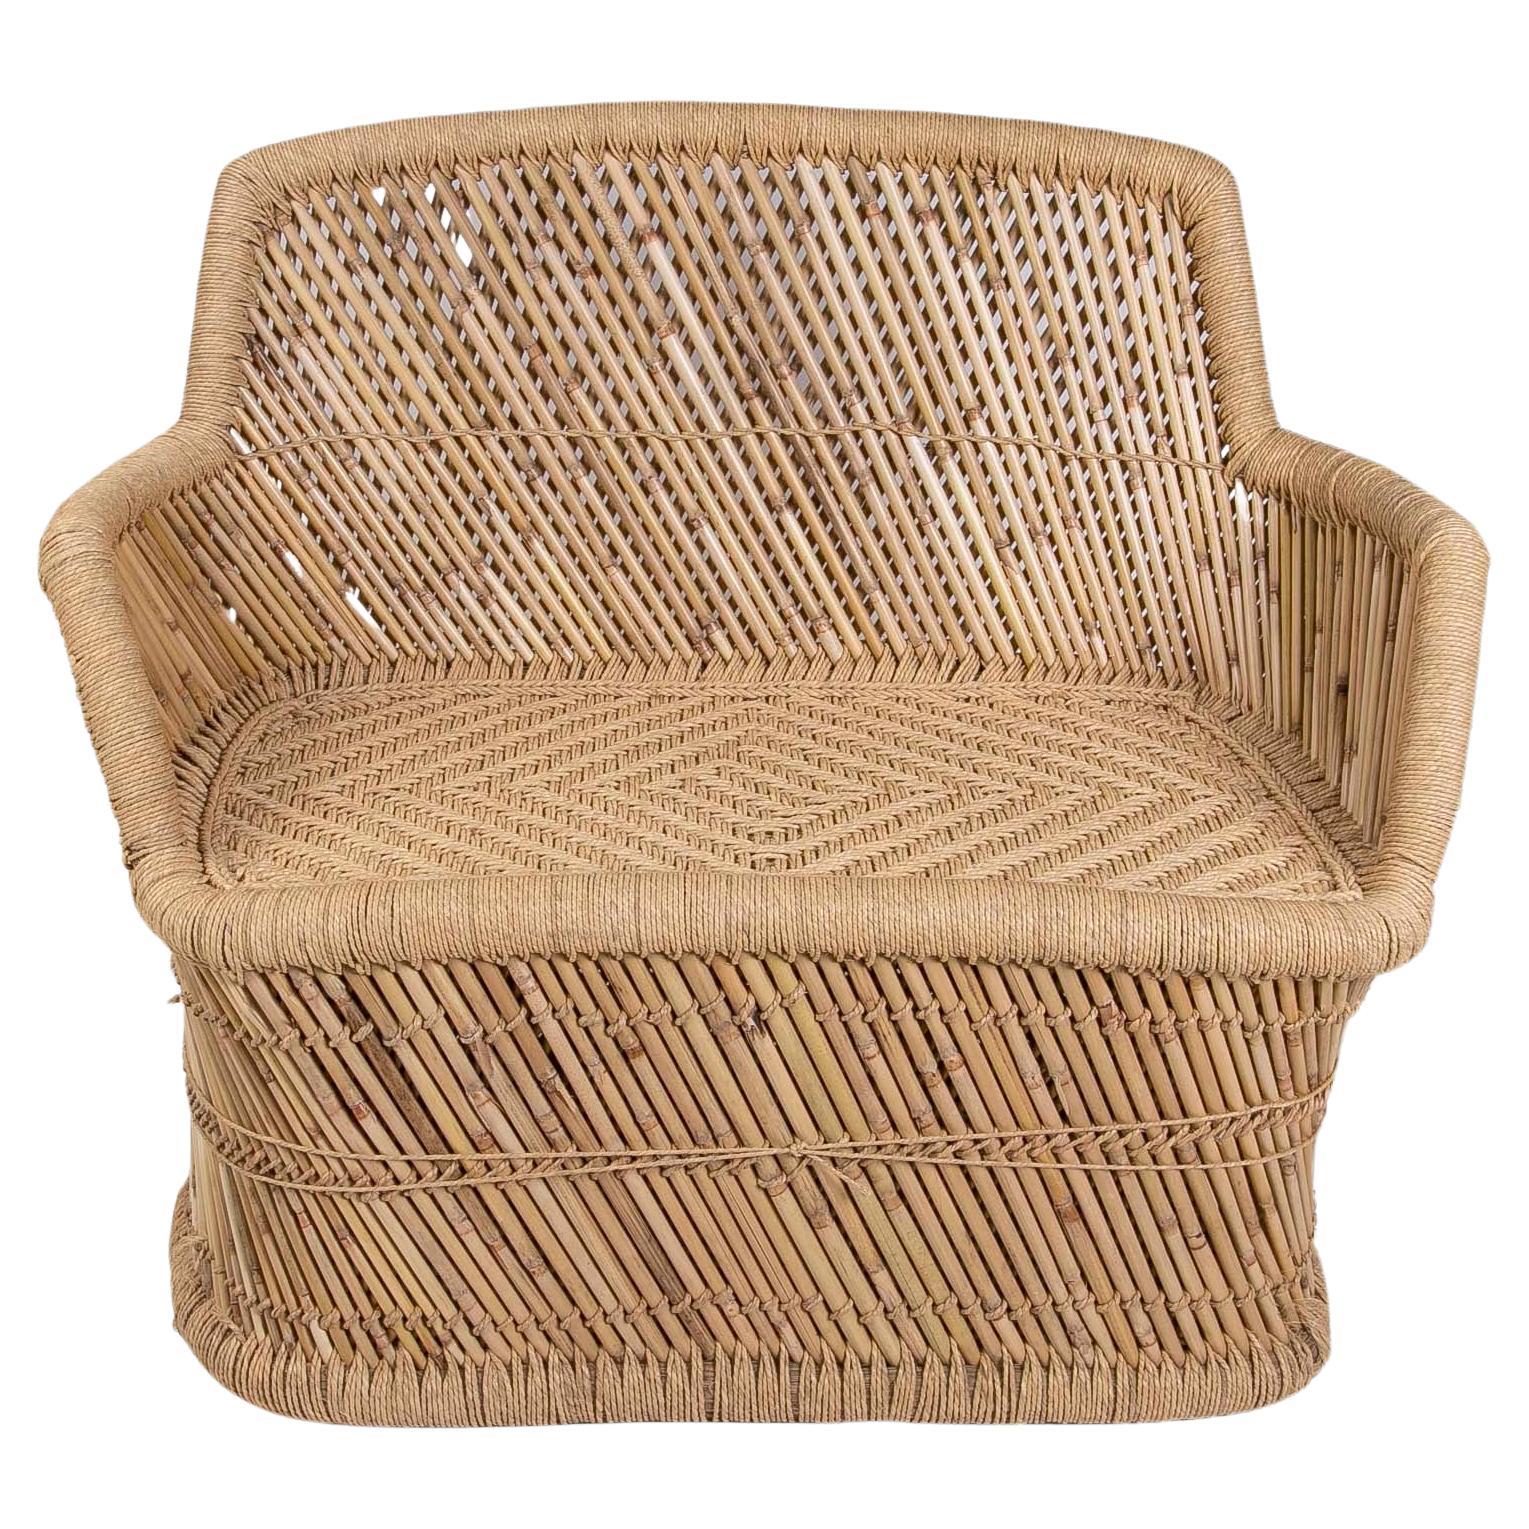  Bamboo and Rope Hand-Stiched  Sofa